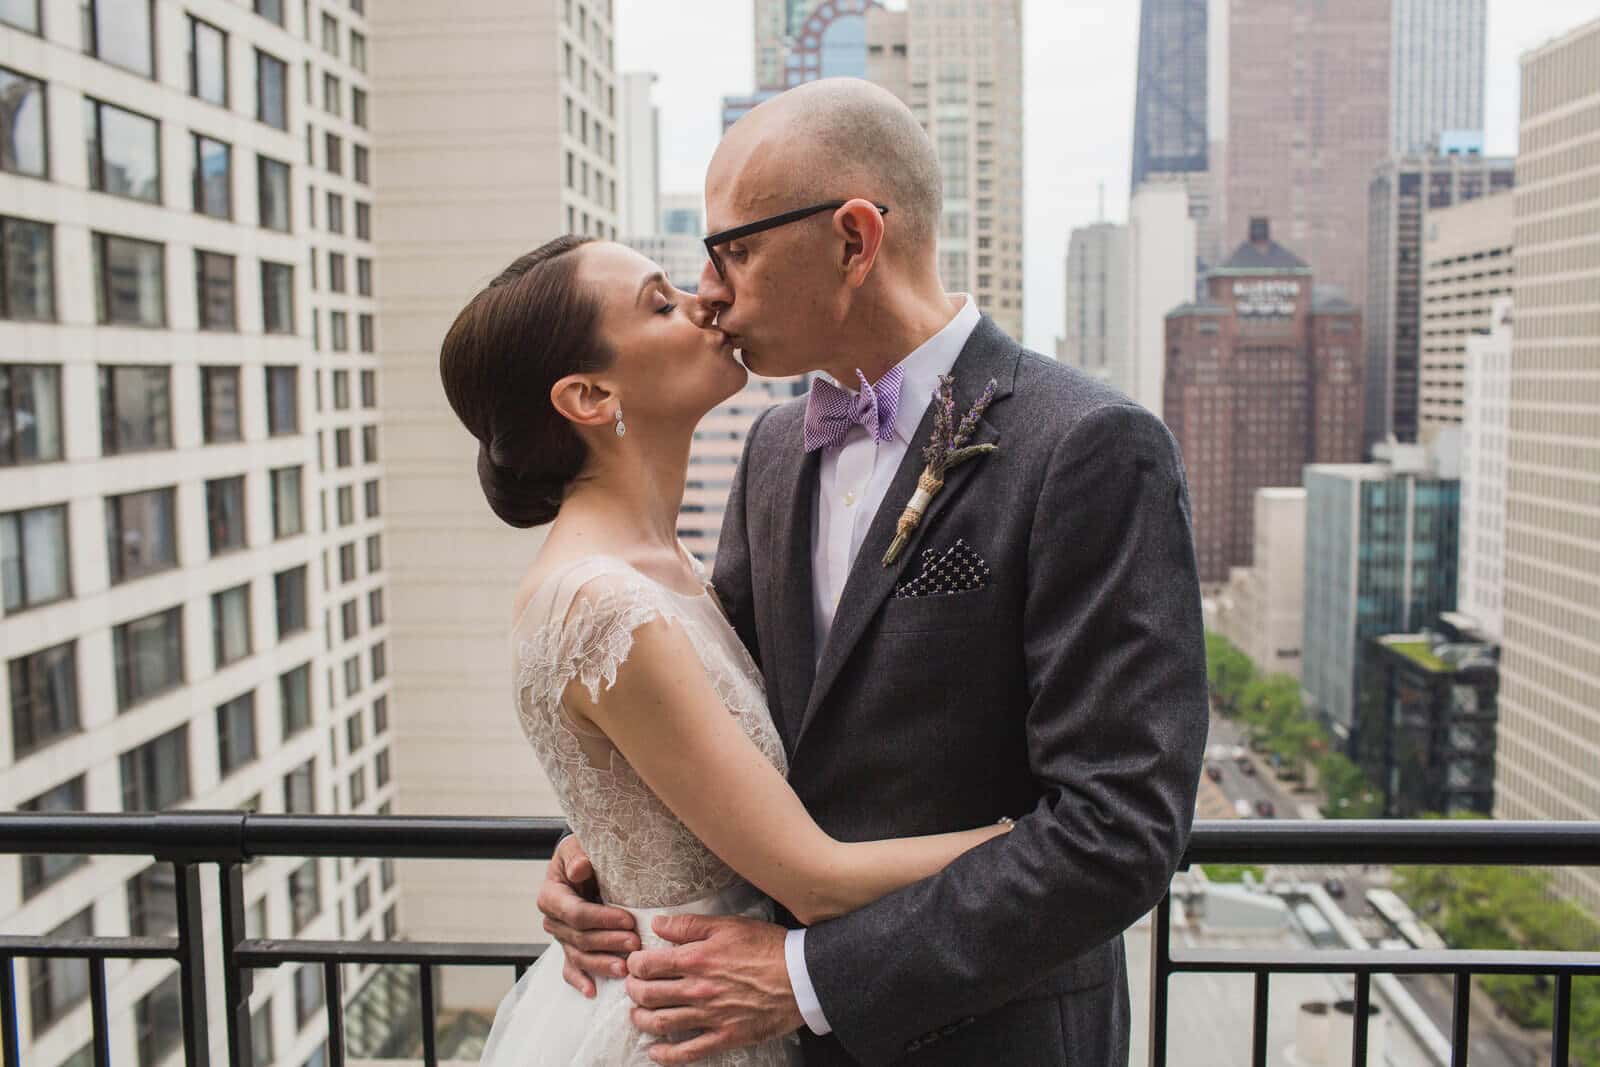 Adam Lowe photography, Columbus, Ohio, wedding, bride and groom, style, cool, editorial, fashion, downtown, Chicago